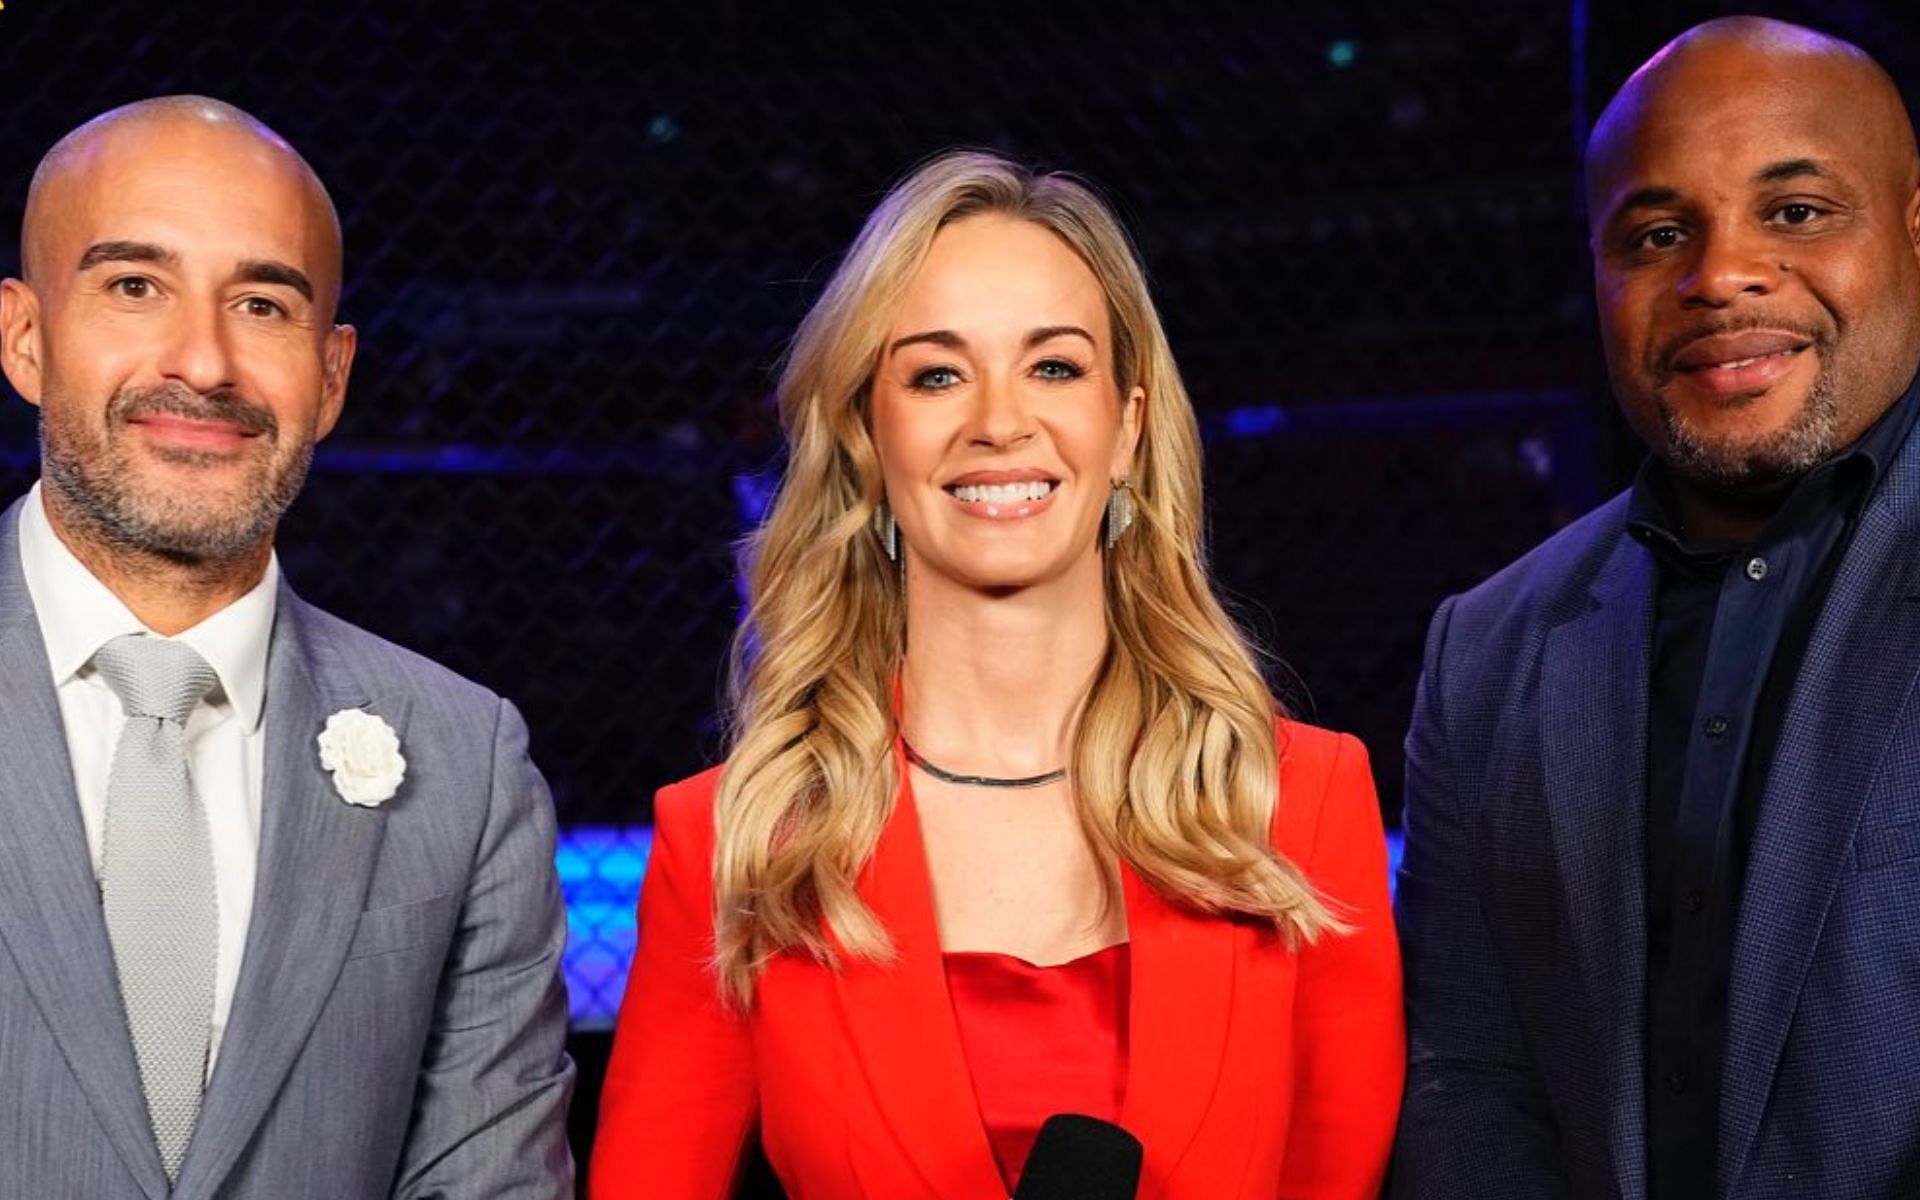 Laura Sanko (pictured with Jon Anik and Daniel Cormier) is a widely recognisable UFC personality [Image Credit: @laura_sanko on Instagram]